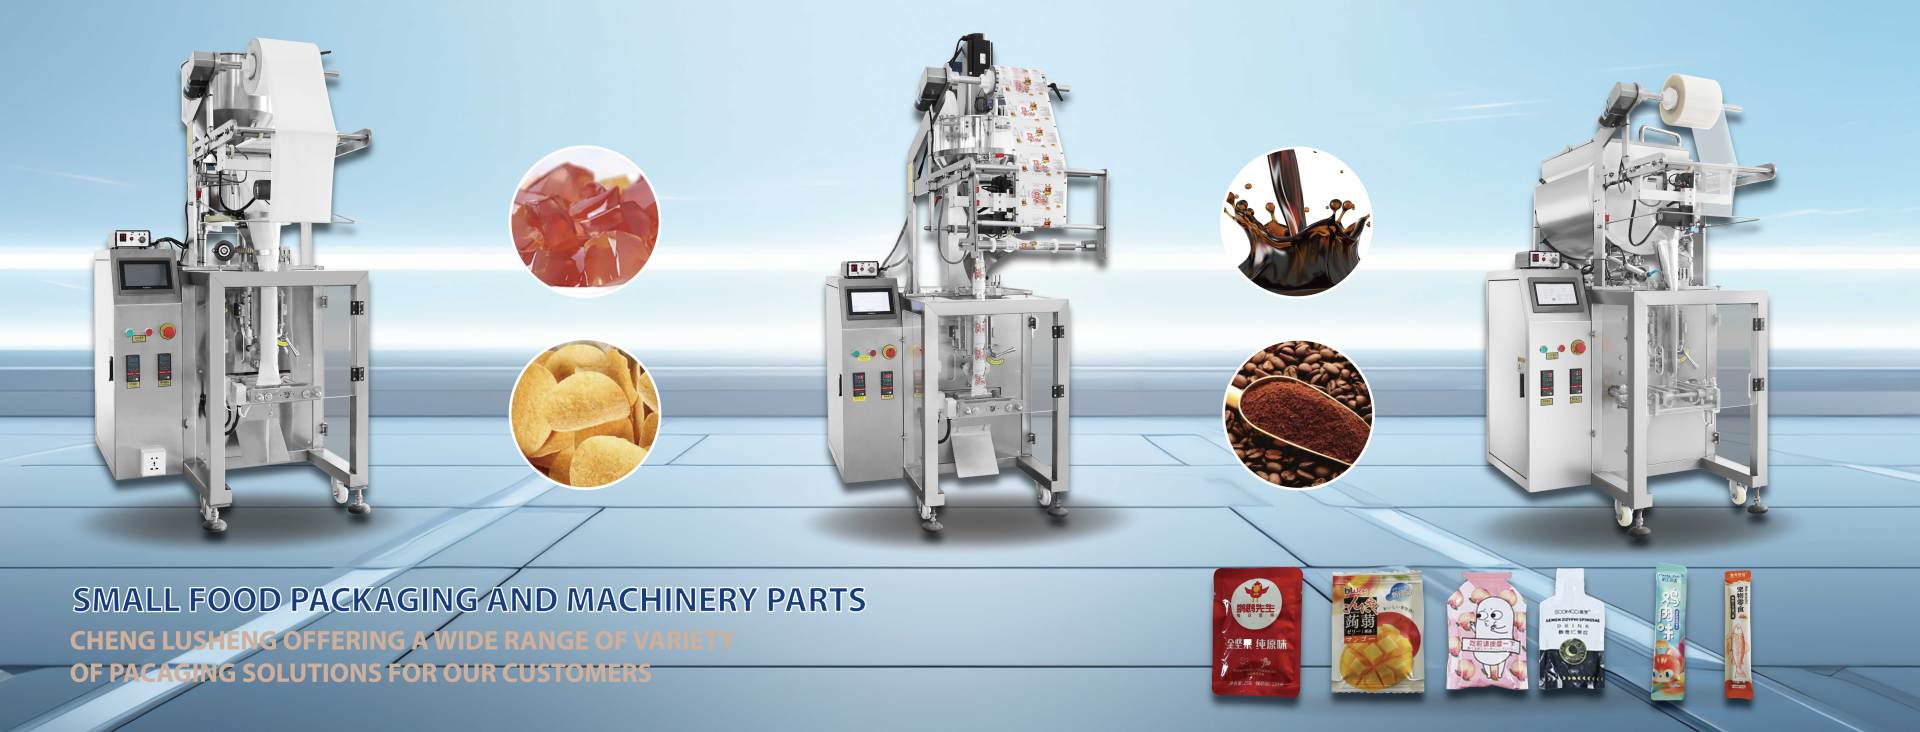 small food packaging and machinery parts